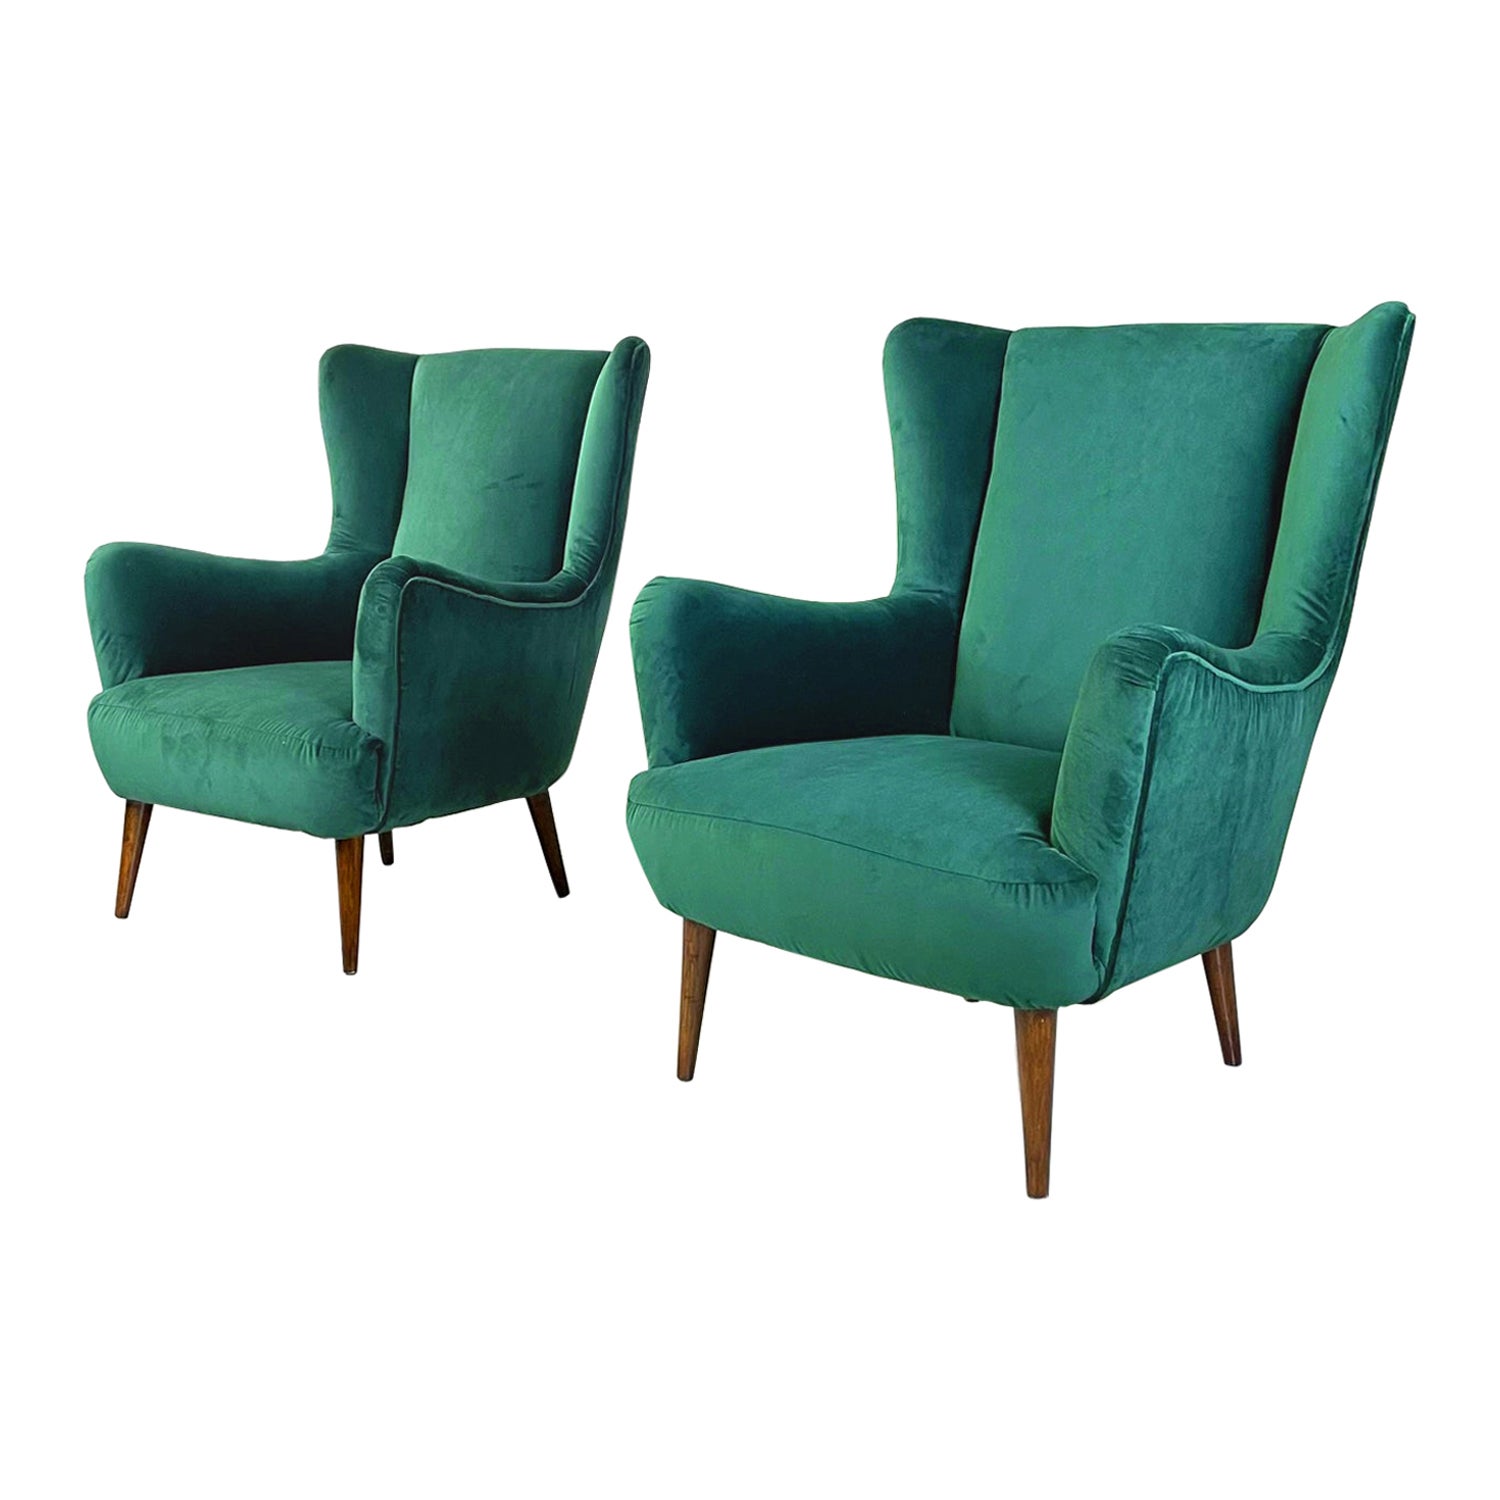 Italian Mid-Century Armchairs in Forest Green Velvet and Wooden Legs, 1950s For Sale